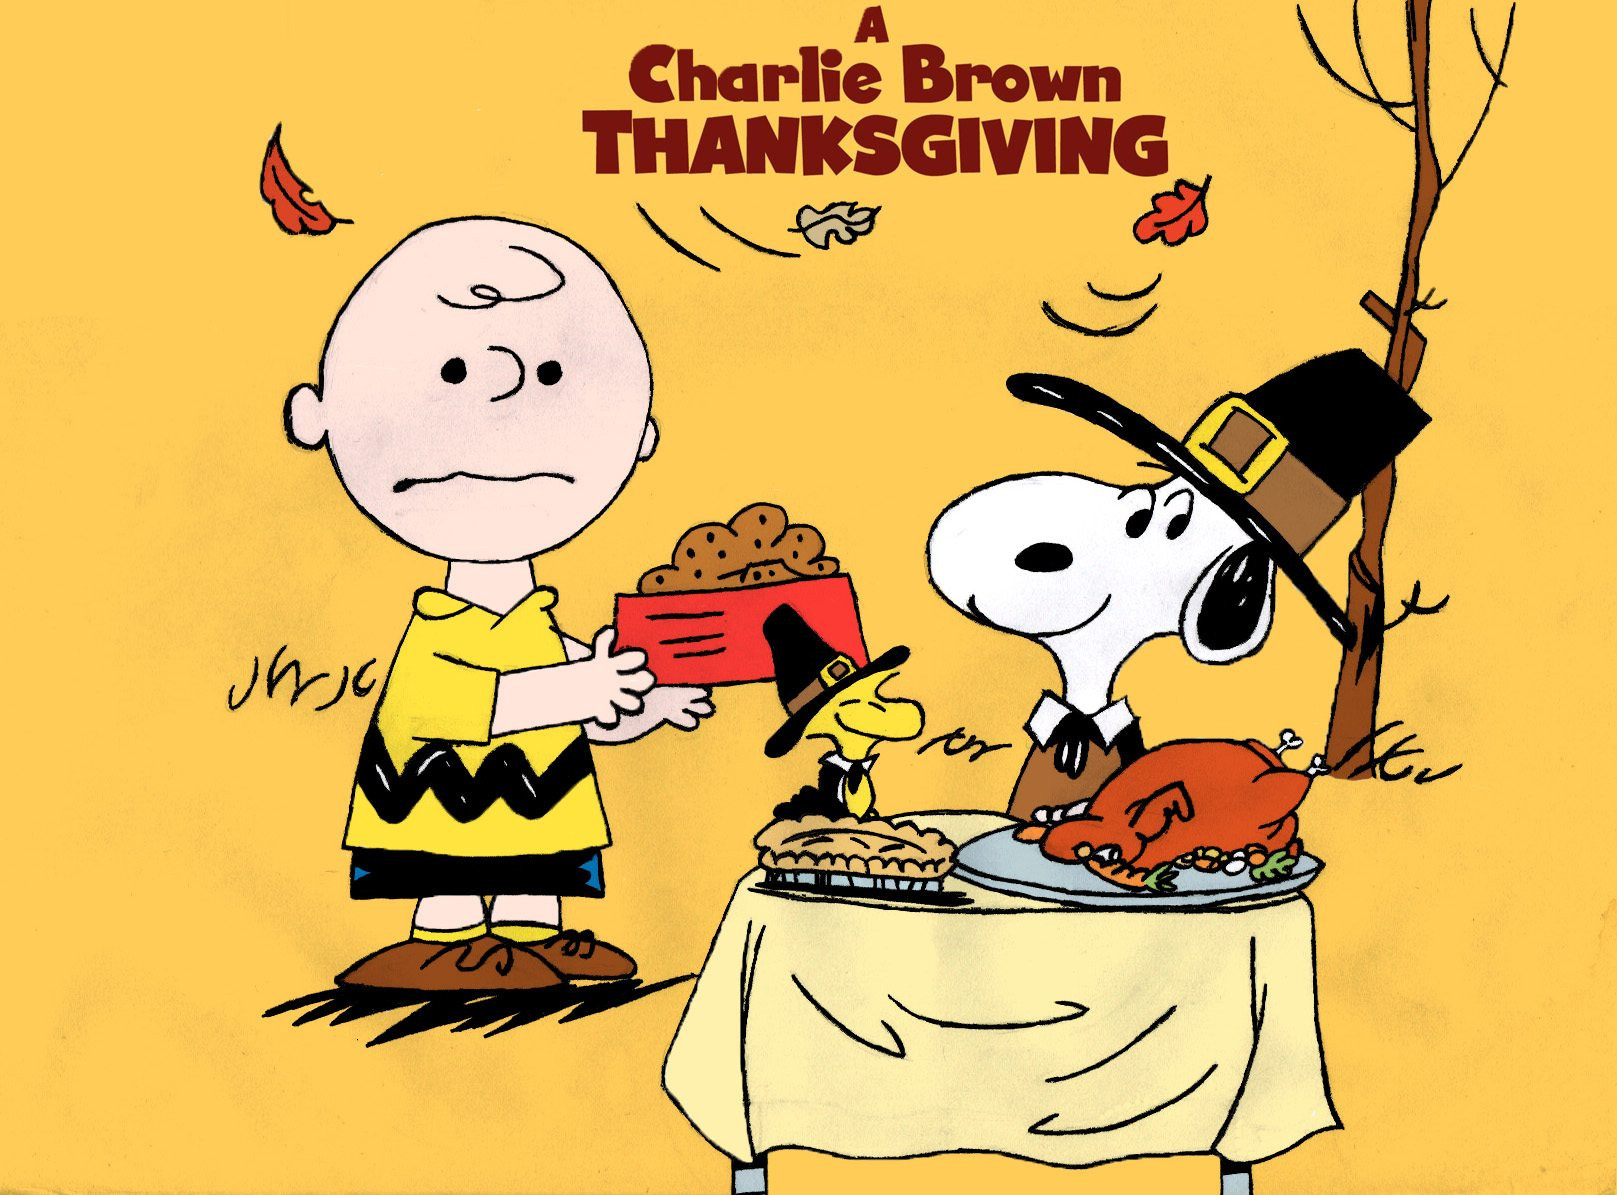 Charlie Brown Thanksgiving Dinner
 Posted on November 21 2014 by Melissa Morell